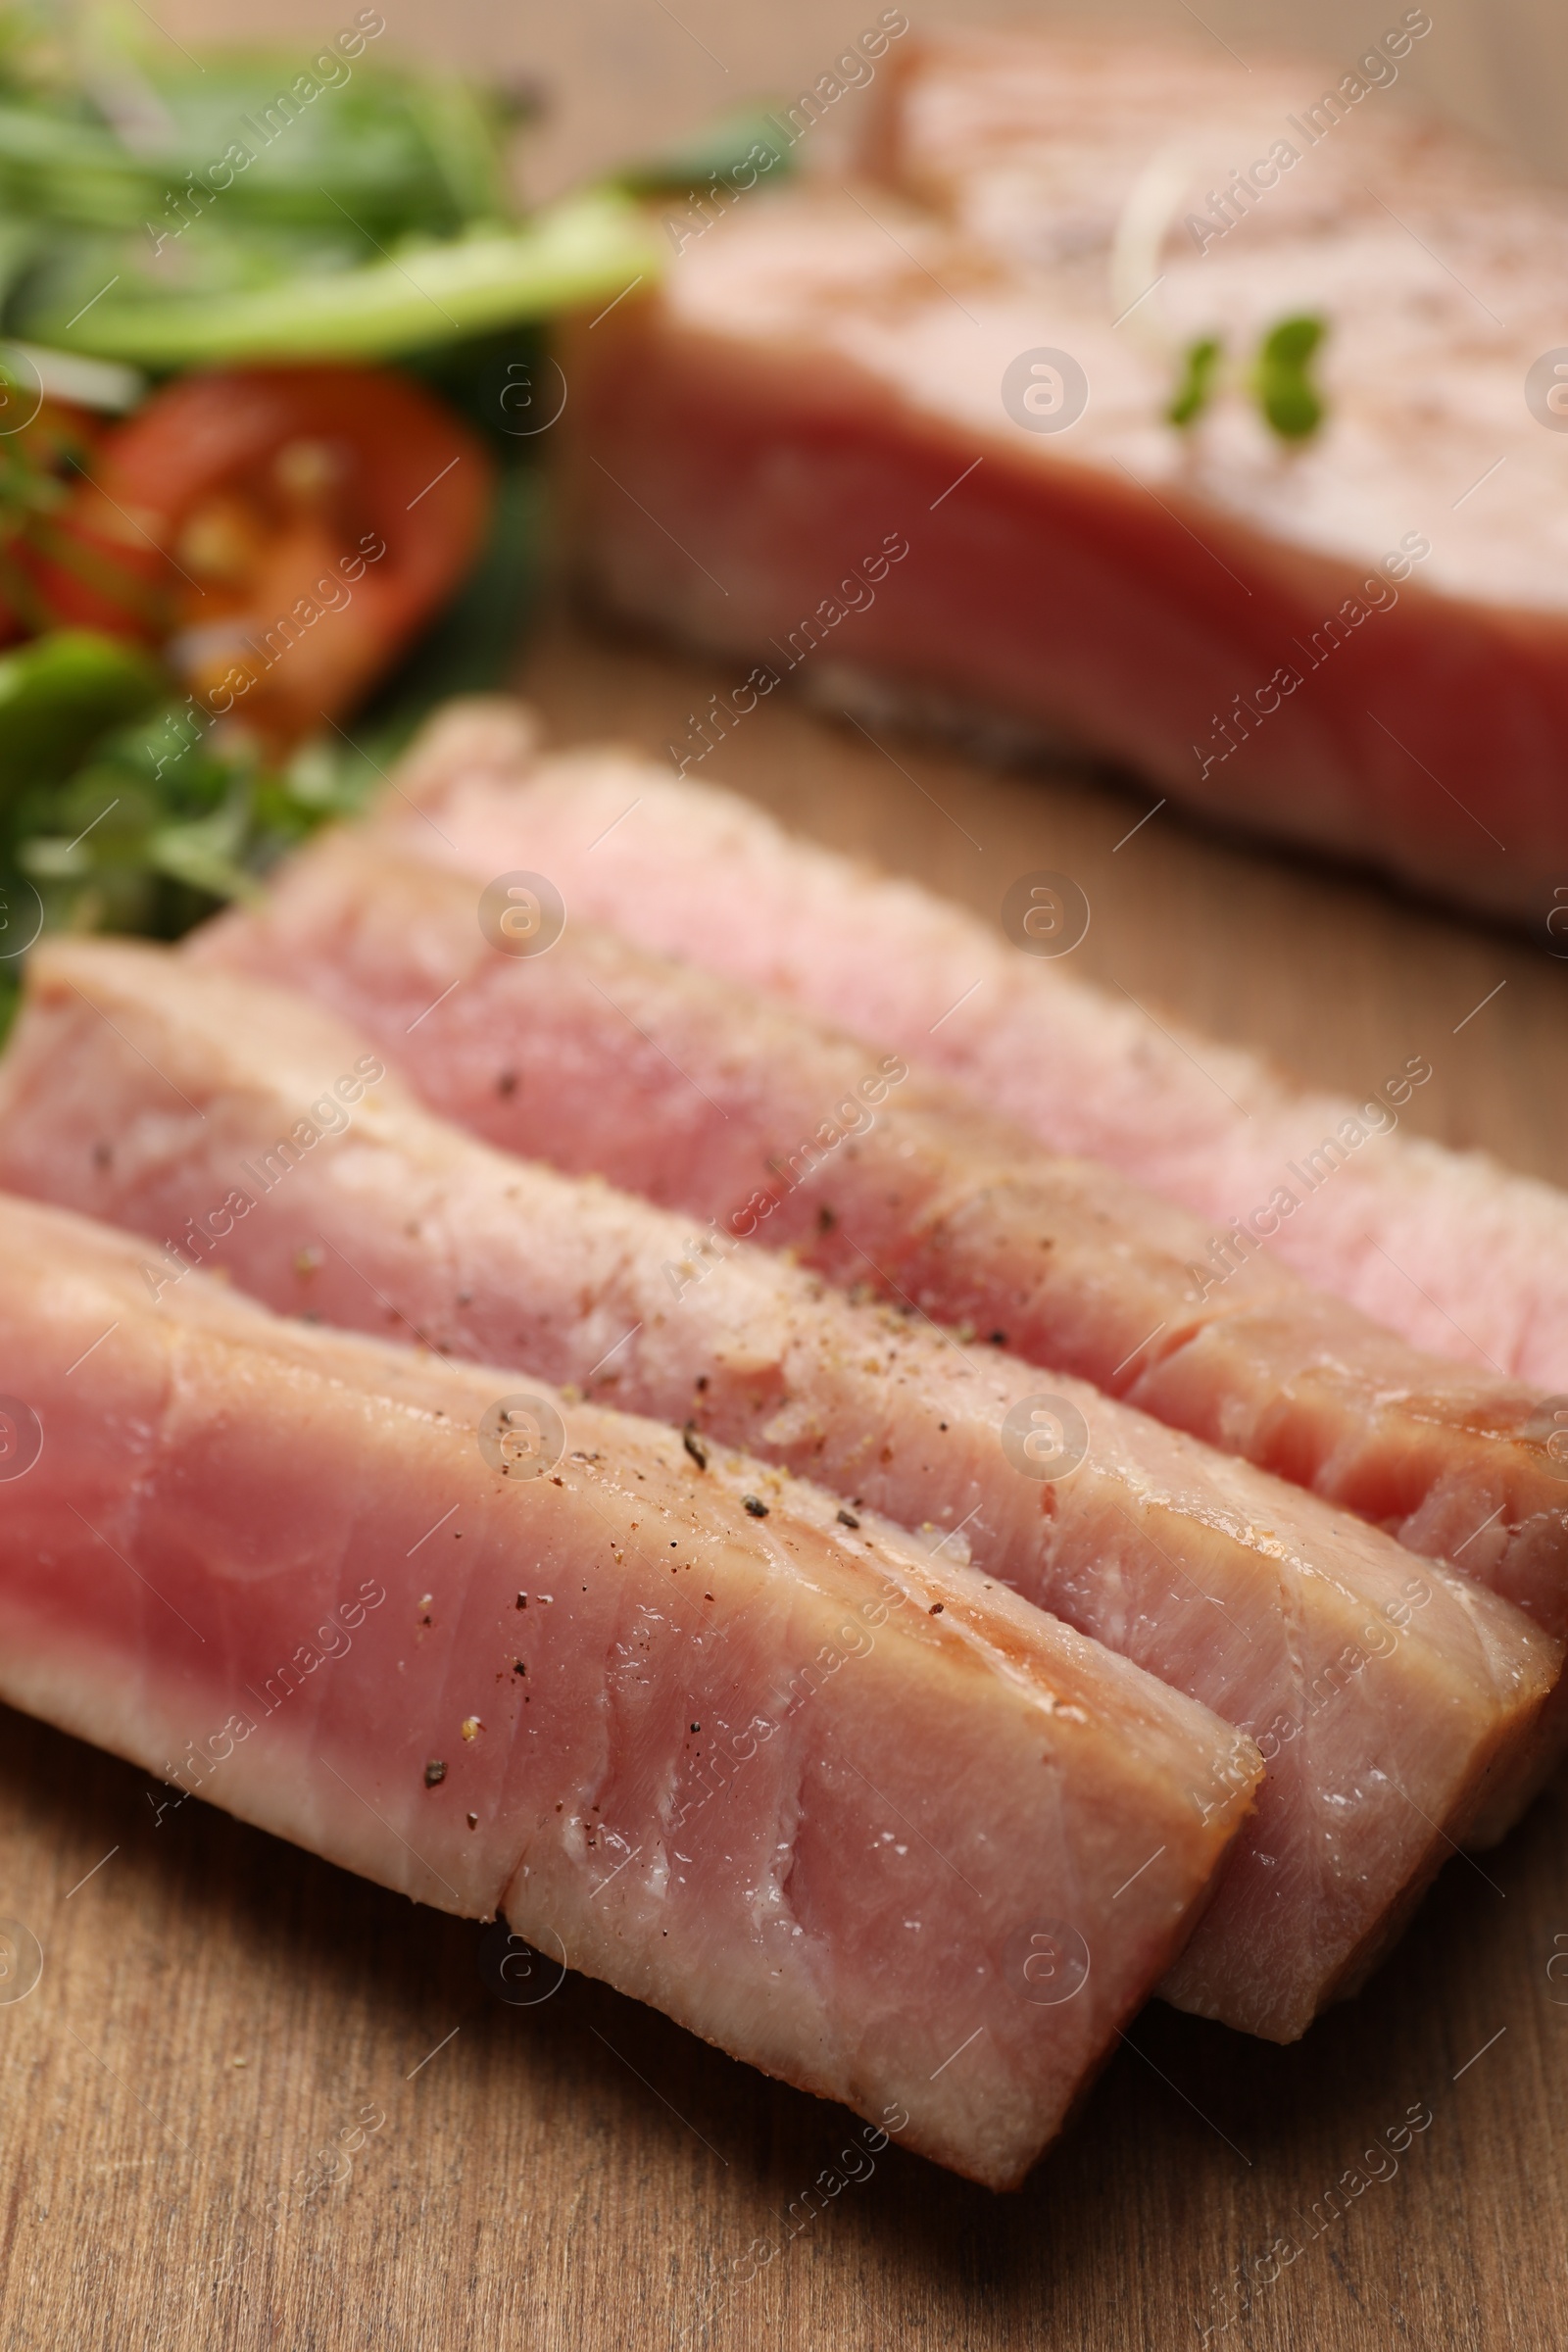 Photo of Pieces of delicious tuna steak on wooden board, closeup